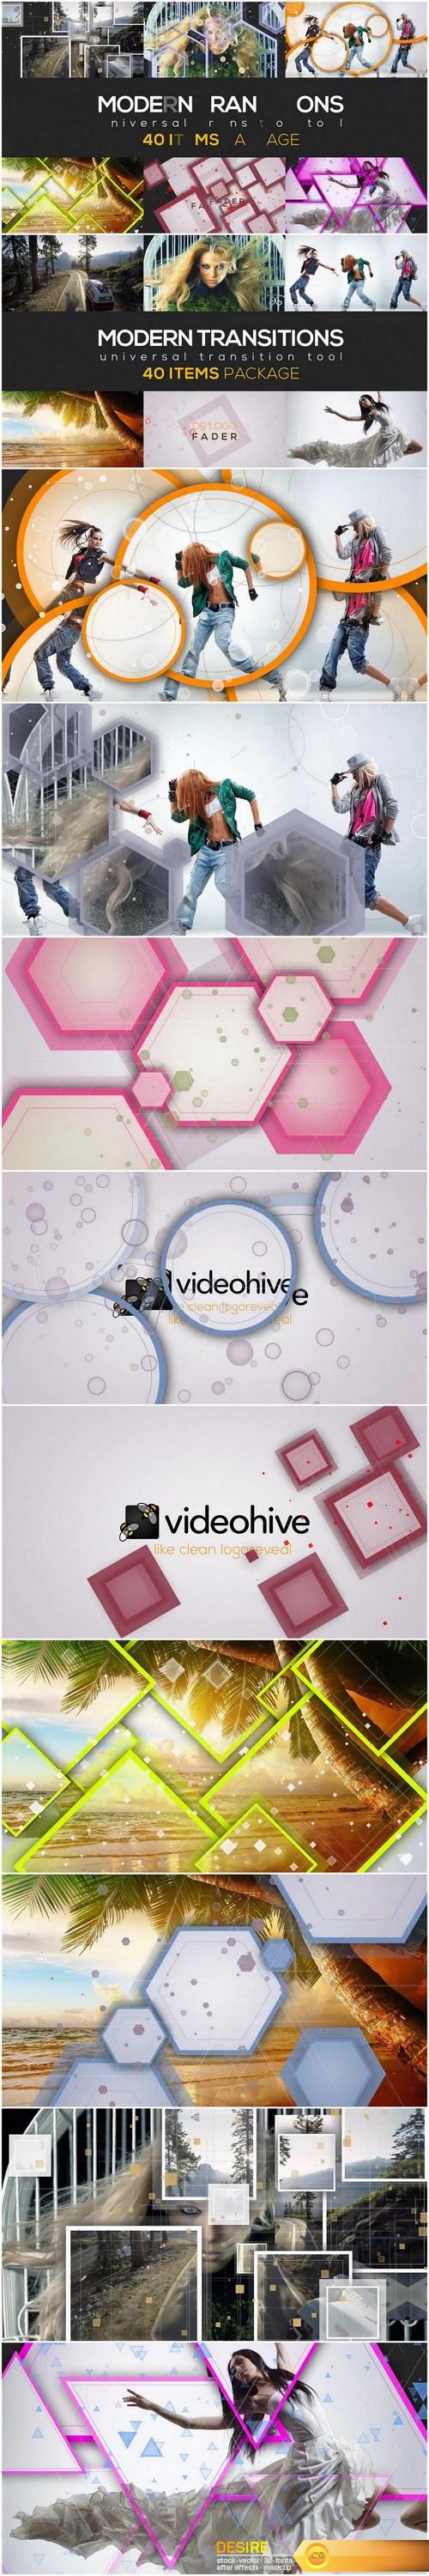 videohive-19830451-modern-transition-pack-40-items